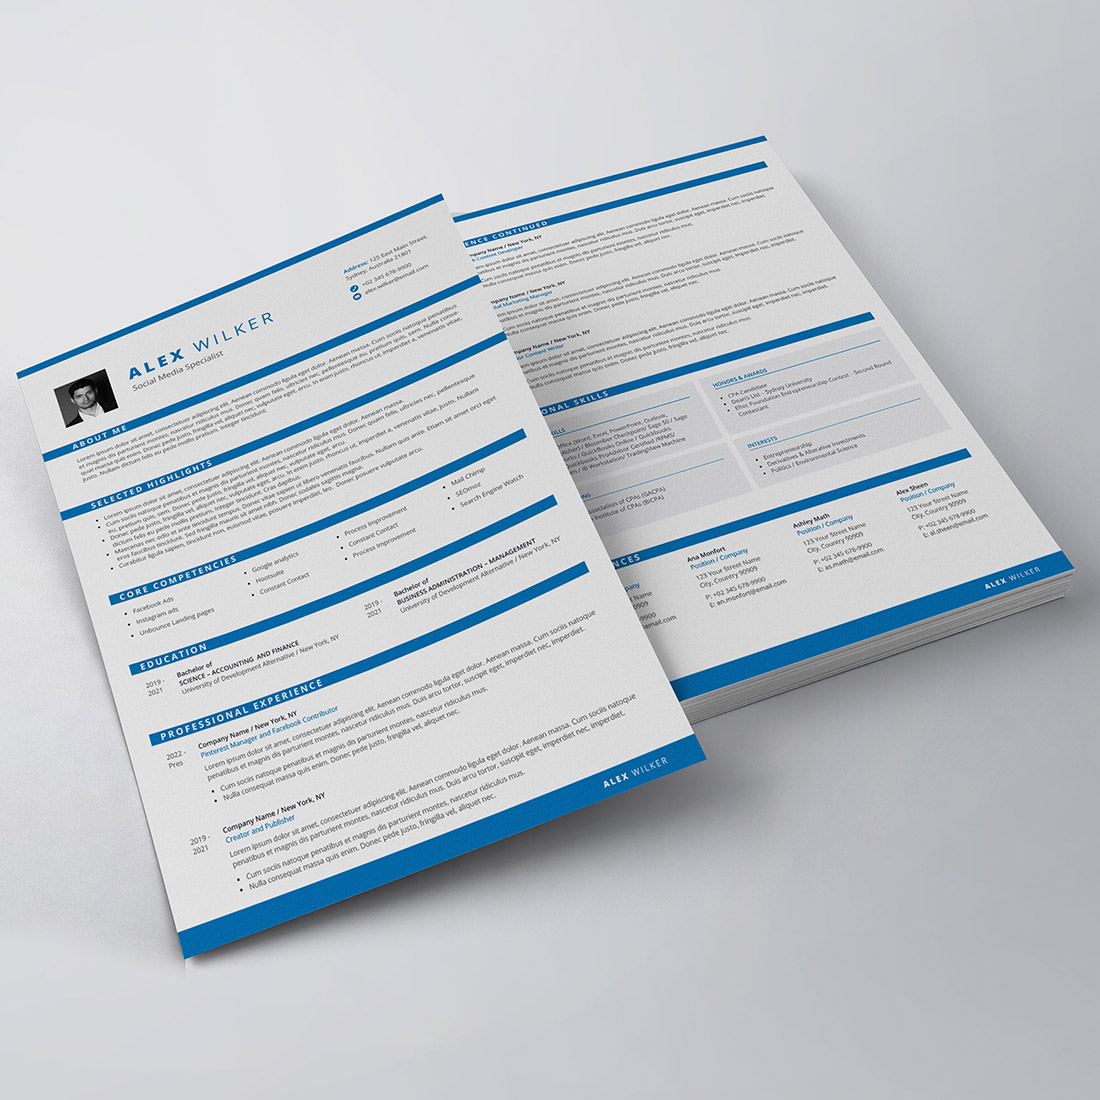 Blue and white resume on a white background.